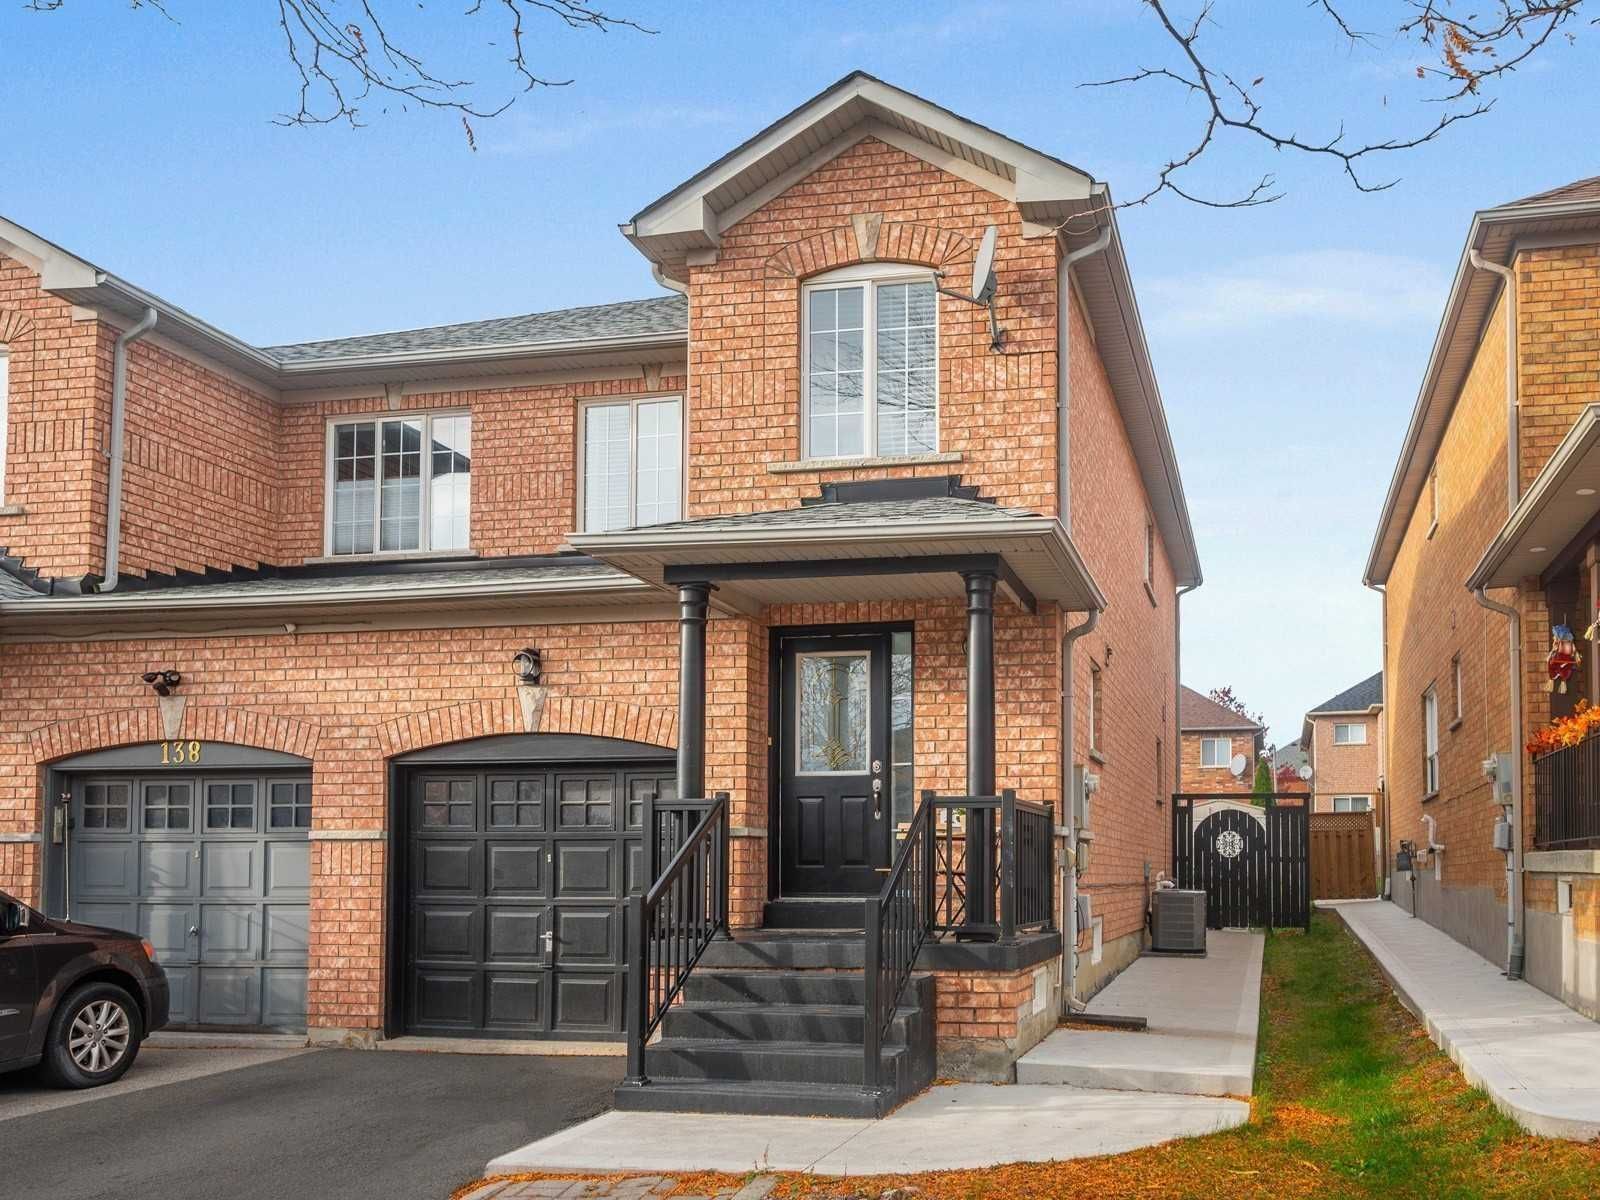 Listing Sold At Adriana Louise Dr in Vaughan